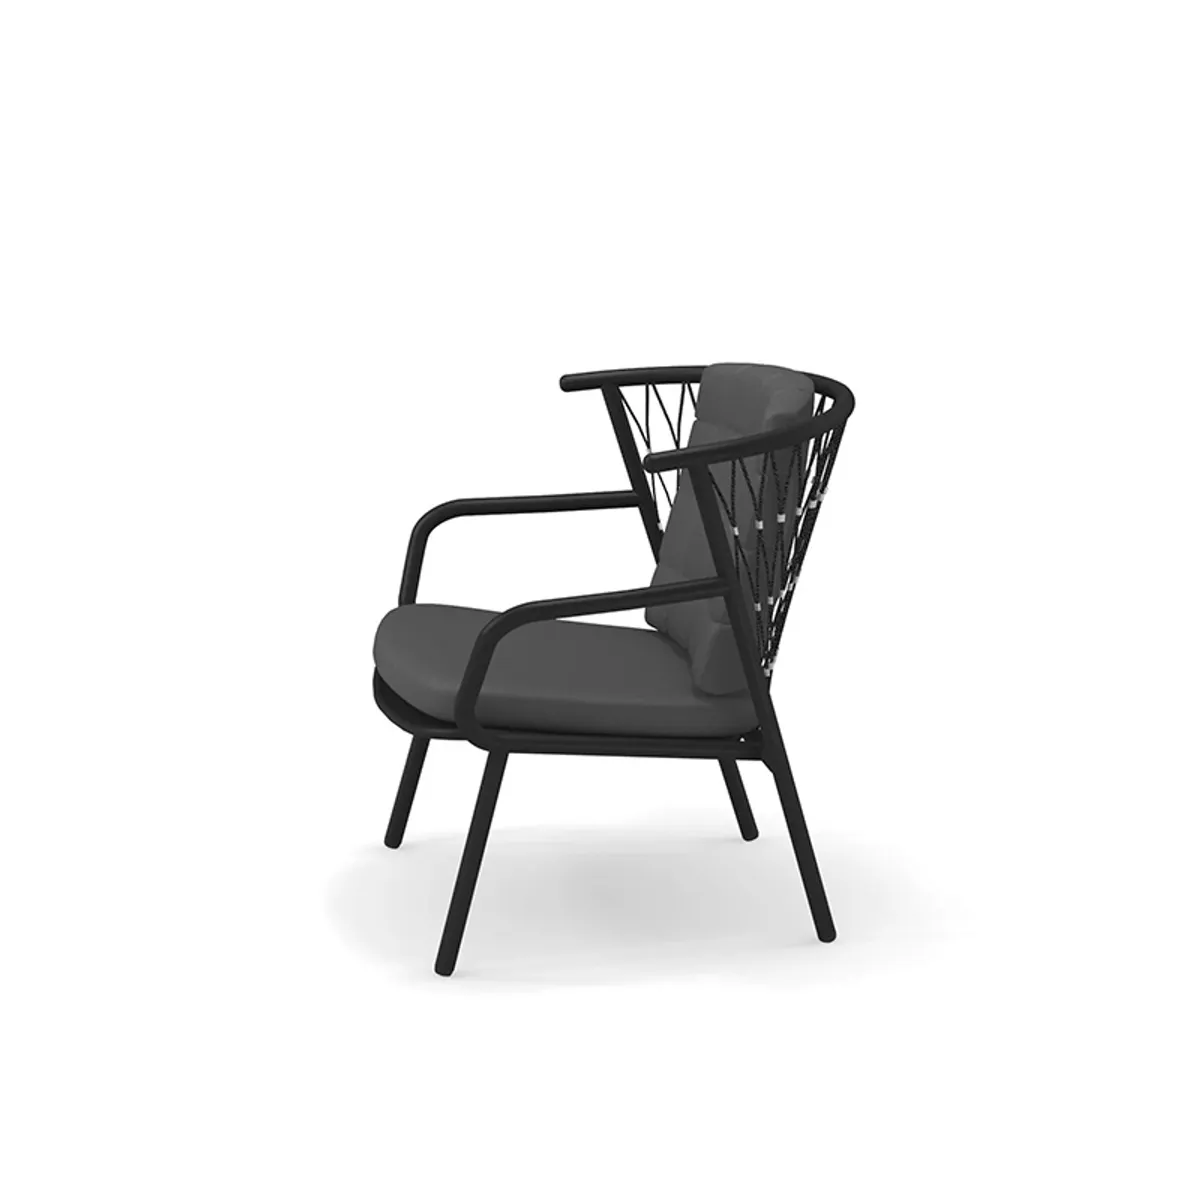 Nef Lounge Chair Outdoor Furniture By Insideoutcontracts 042